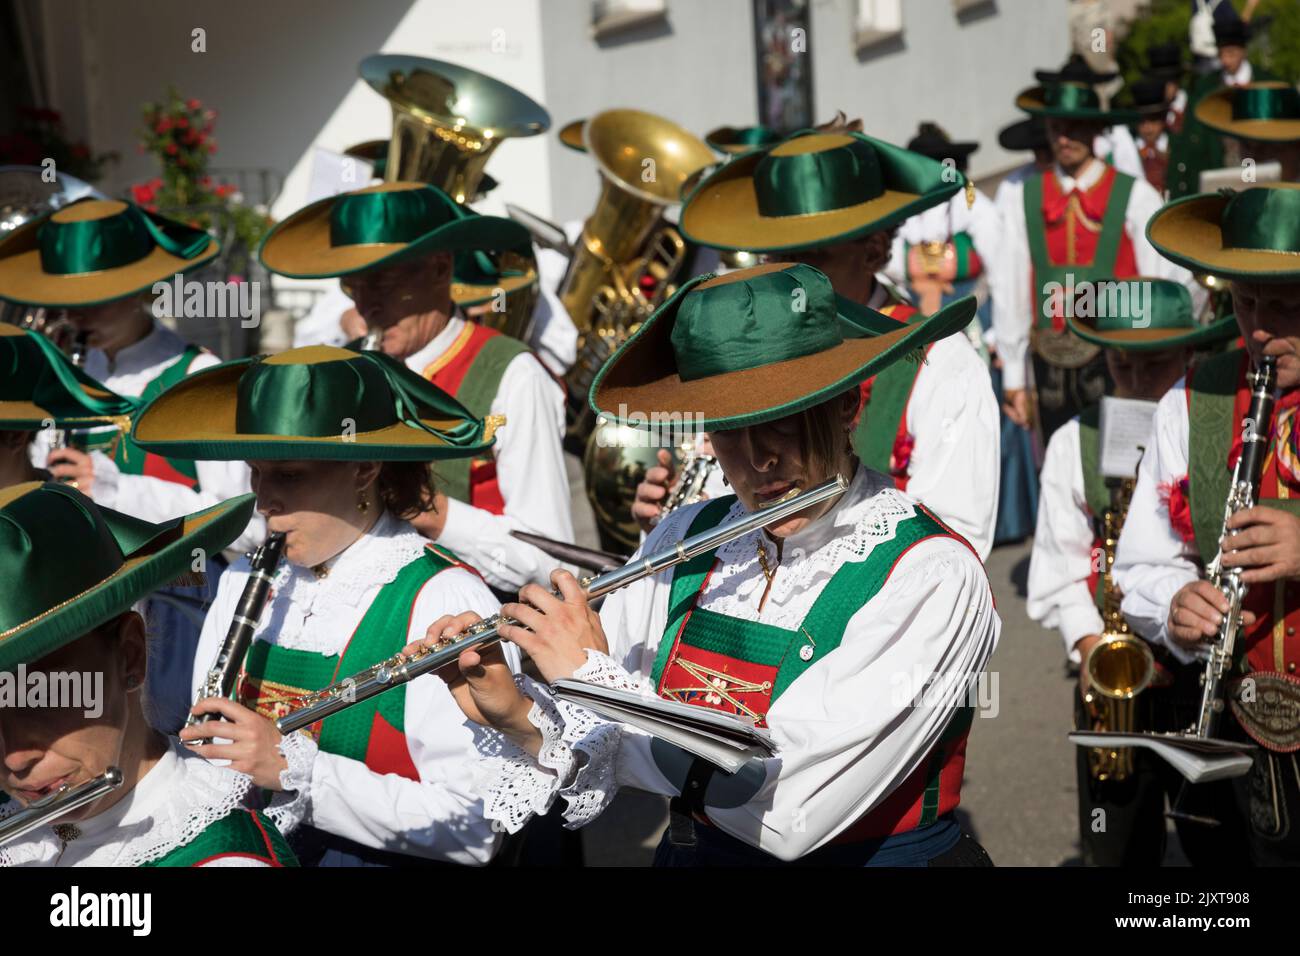 Men and women musicians wearing traditional local period costume of wide brimmed hats and leather breeches or long skirts, 'Corpus Christi' parade. Stock Photo